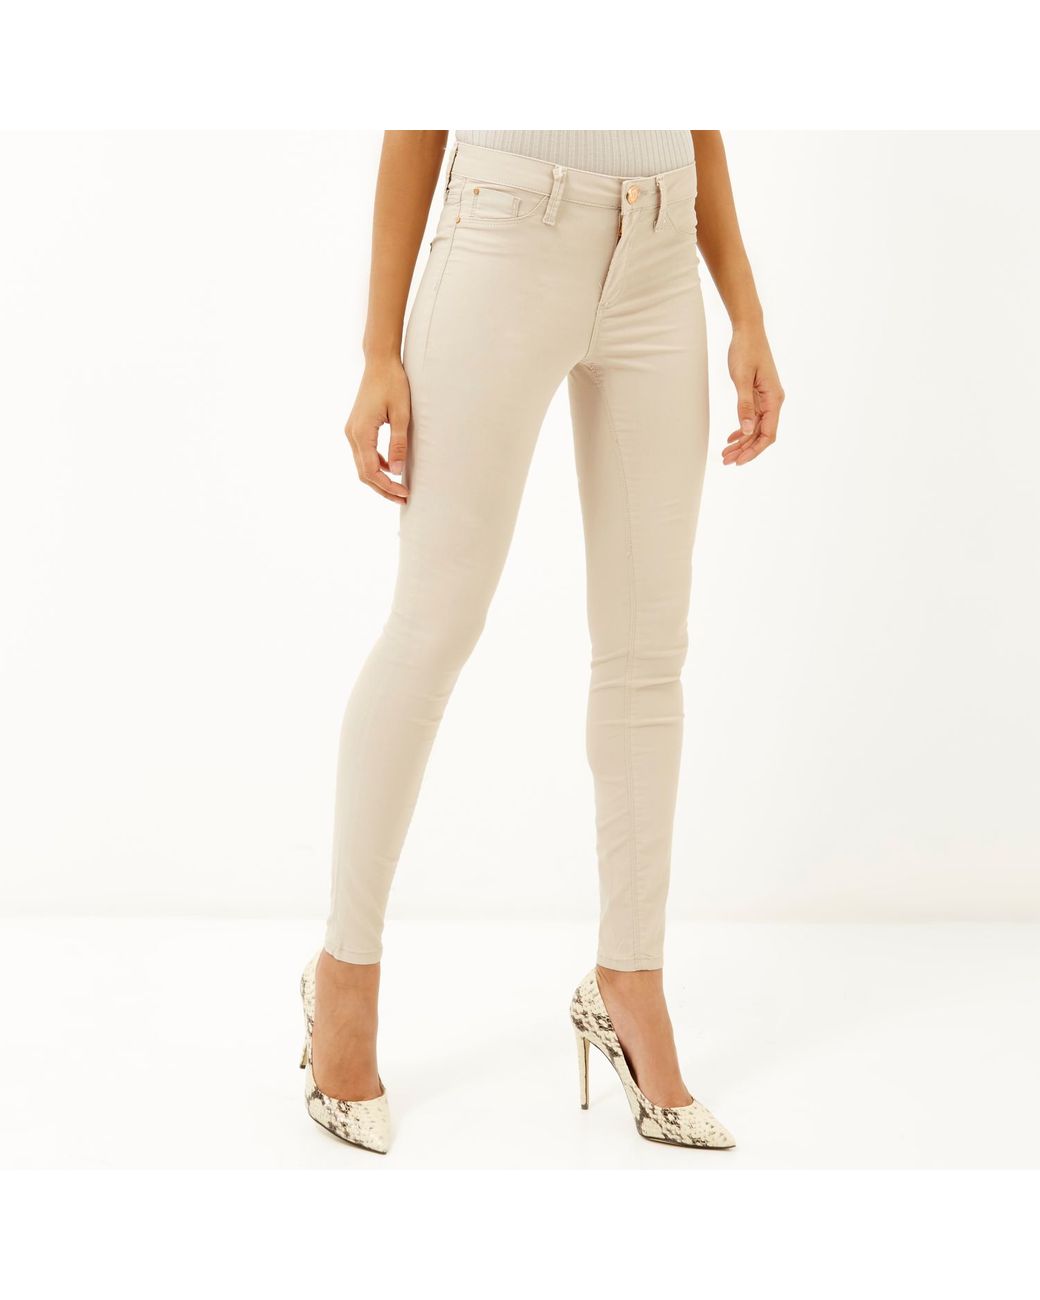 River Island Cream Coated Molly Jeggings in Natural | Lyst UK